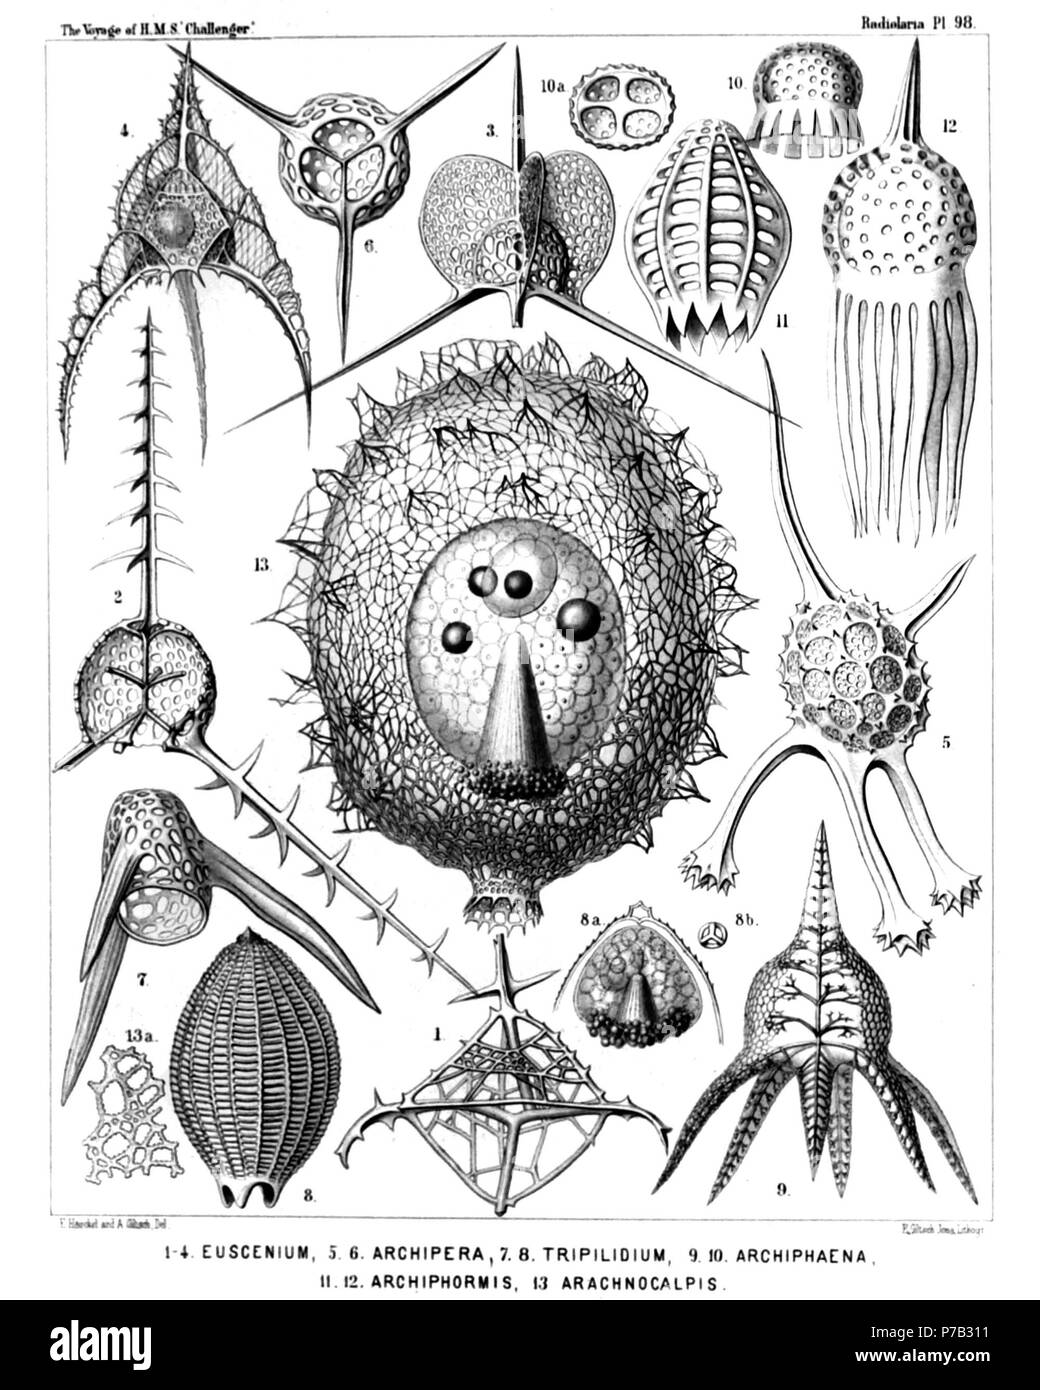 English: Illustration from Report on the Radiolaria collected by H.M.S. Challenger during the years 1873-1876. Part III. Original description follows:  Plate 98. Tripocalpida et Phænocalpida.  Diam.  Fig. 1. Euscenium plectaniscus, n. sp., × 300  Half frontal, half basal view.  Fig. 2. Cladoscenium pectinatum, n. sp., × 400  Shell opened by a vertical section.  Fig. 3. Archiscenium cyclopterum, n. sp., × 400  View from the dorsal side.  Fig. 4. Pteroscenium arcuatum, n. sp., × 400  The central capsule contains a large spherical nucleus with a nucleolus.  Fig. 5. Archipera cortiniscus, n. sp.,  Stock Photo